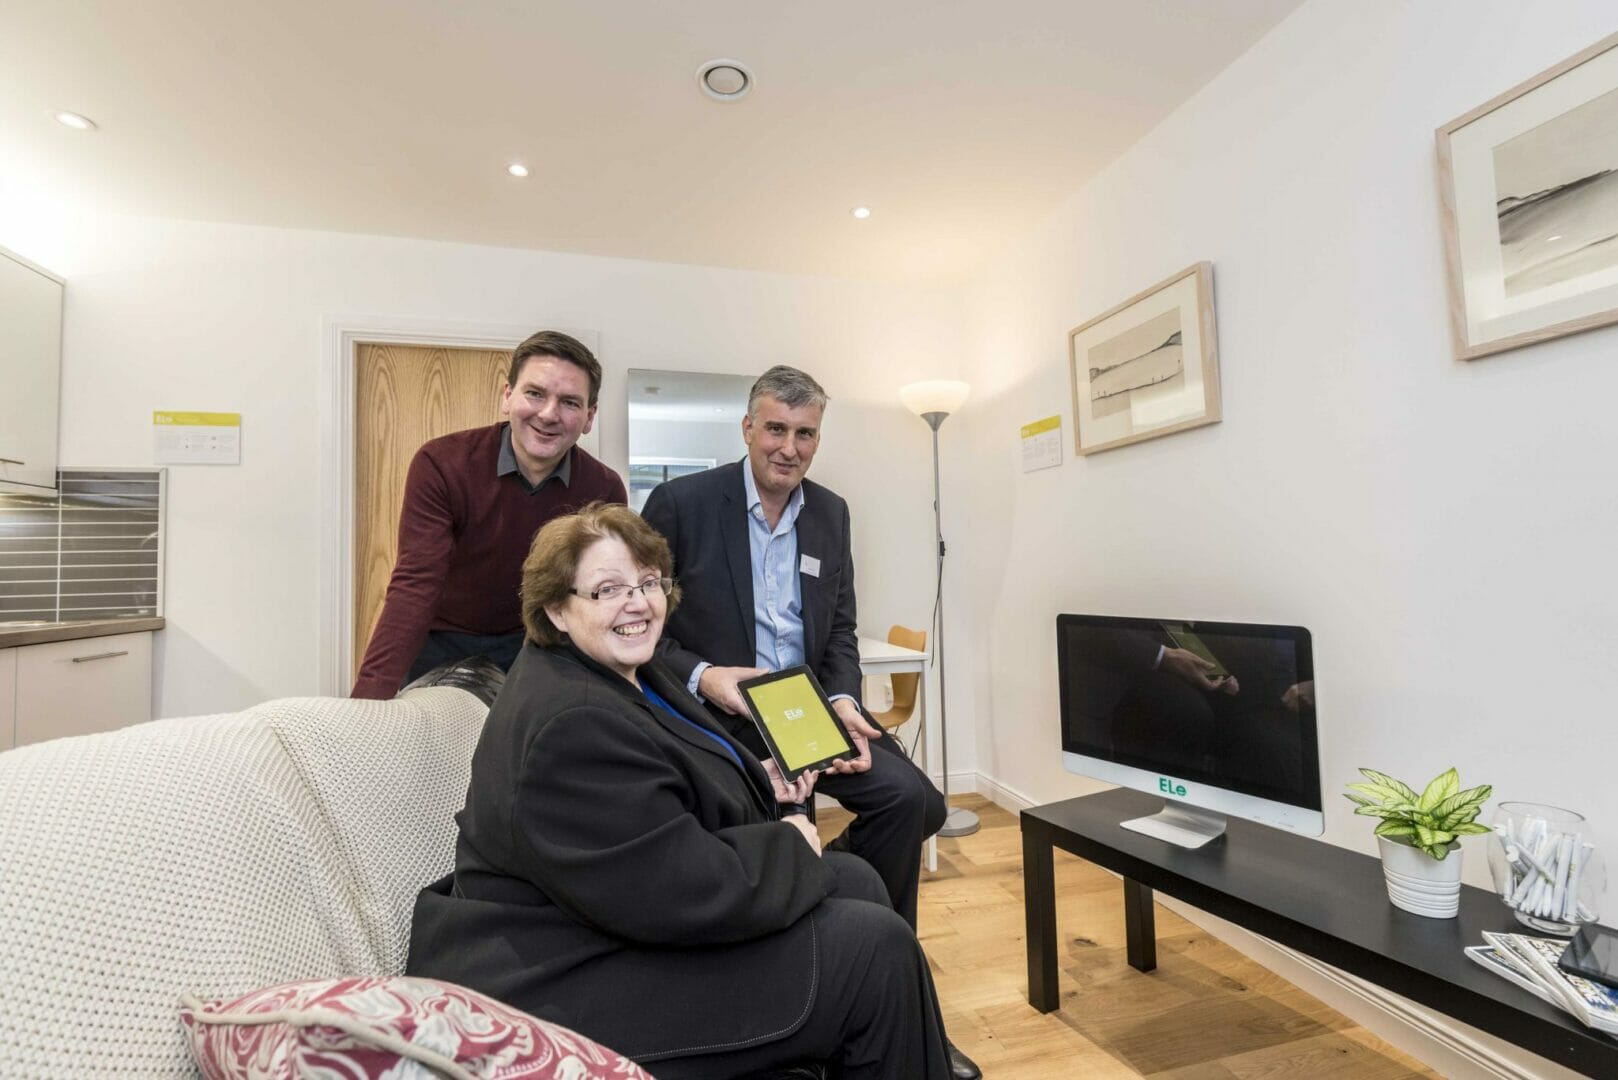 HOME OF THE FUTURE POWERED BY INNOVATIVE NORTH WEST FIRM ELe IS UNVEILED @ExtremeLowEnerg